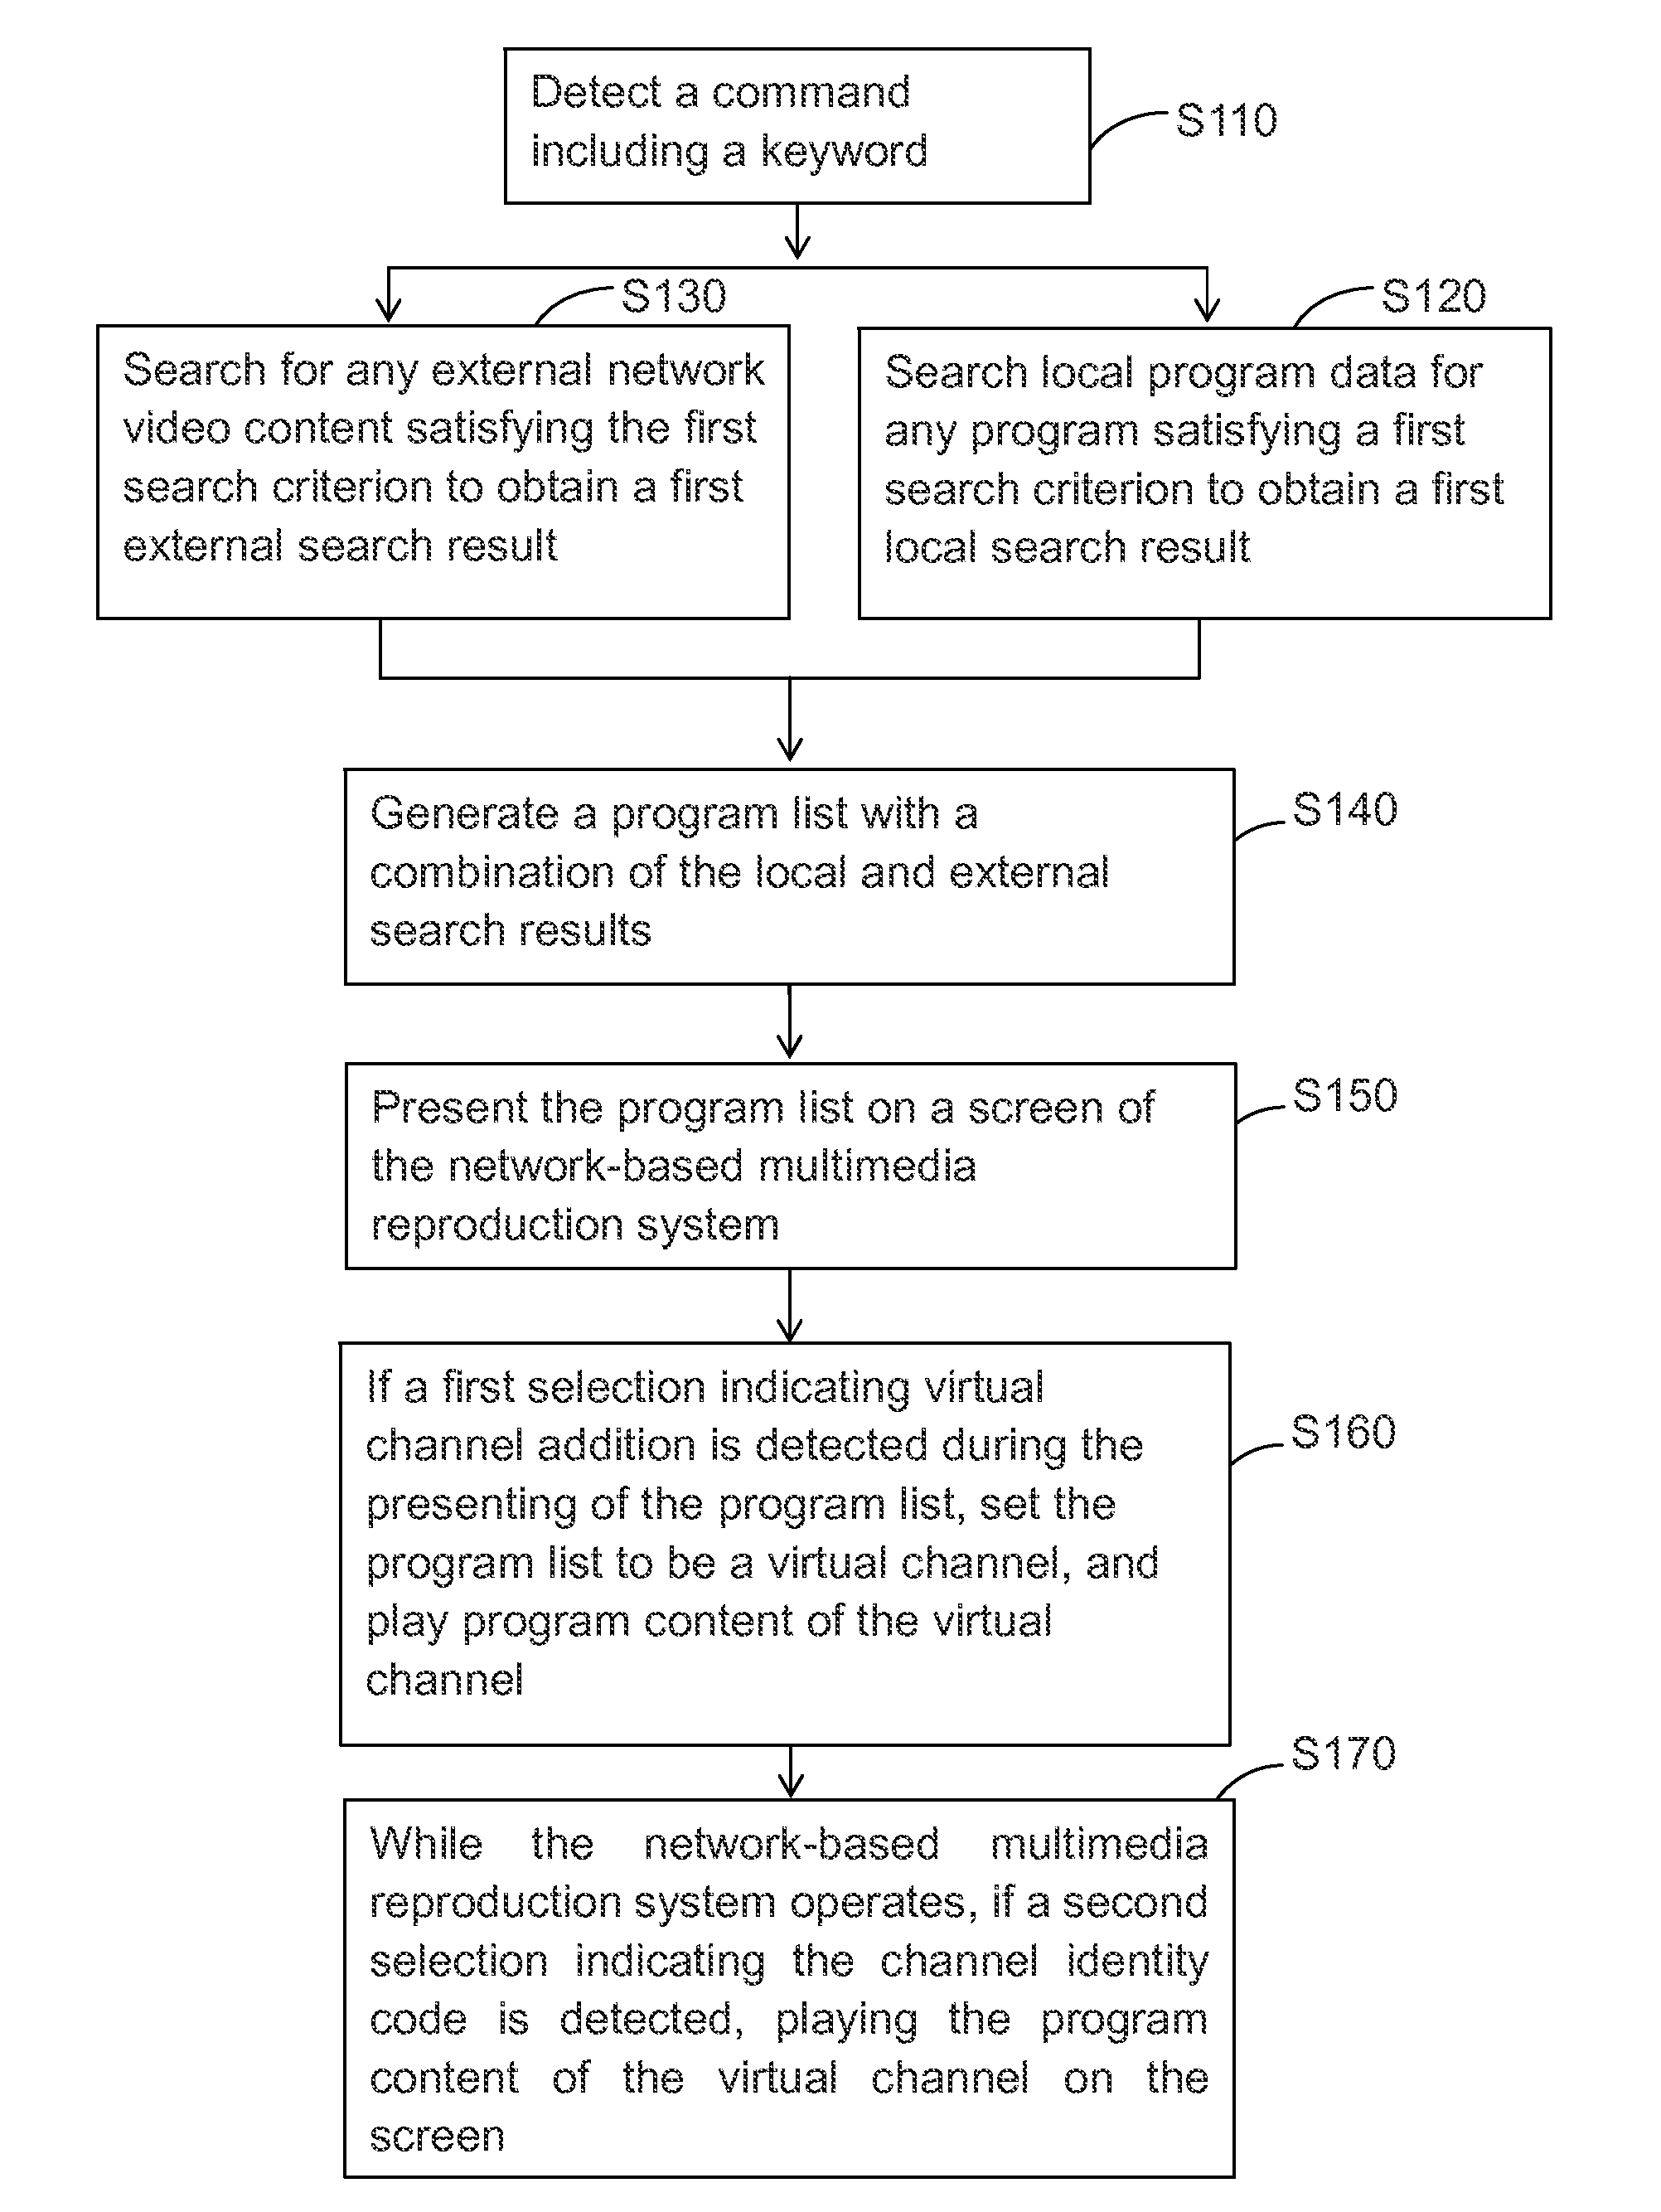 Method for virtual channel management, network-based multimedia reproduction system with virtual channel, and computer readable storage medium